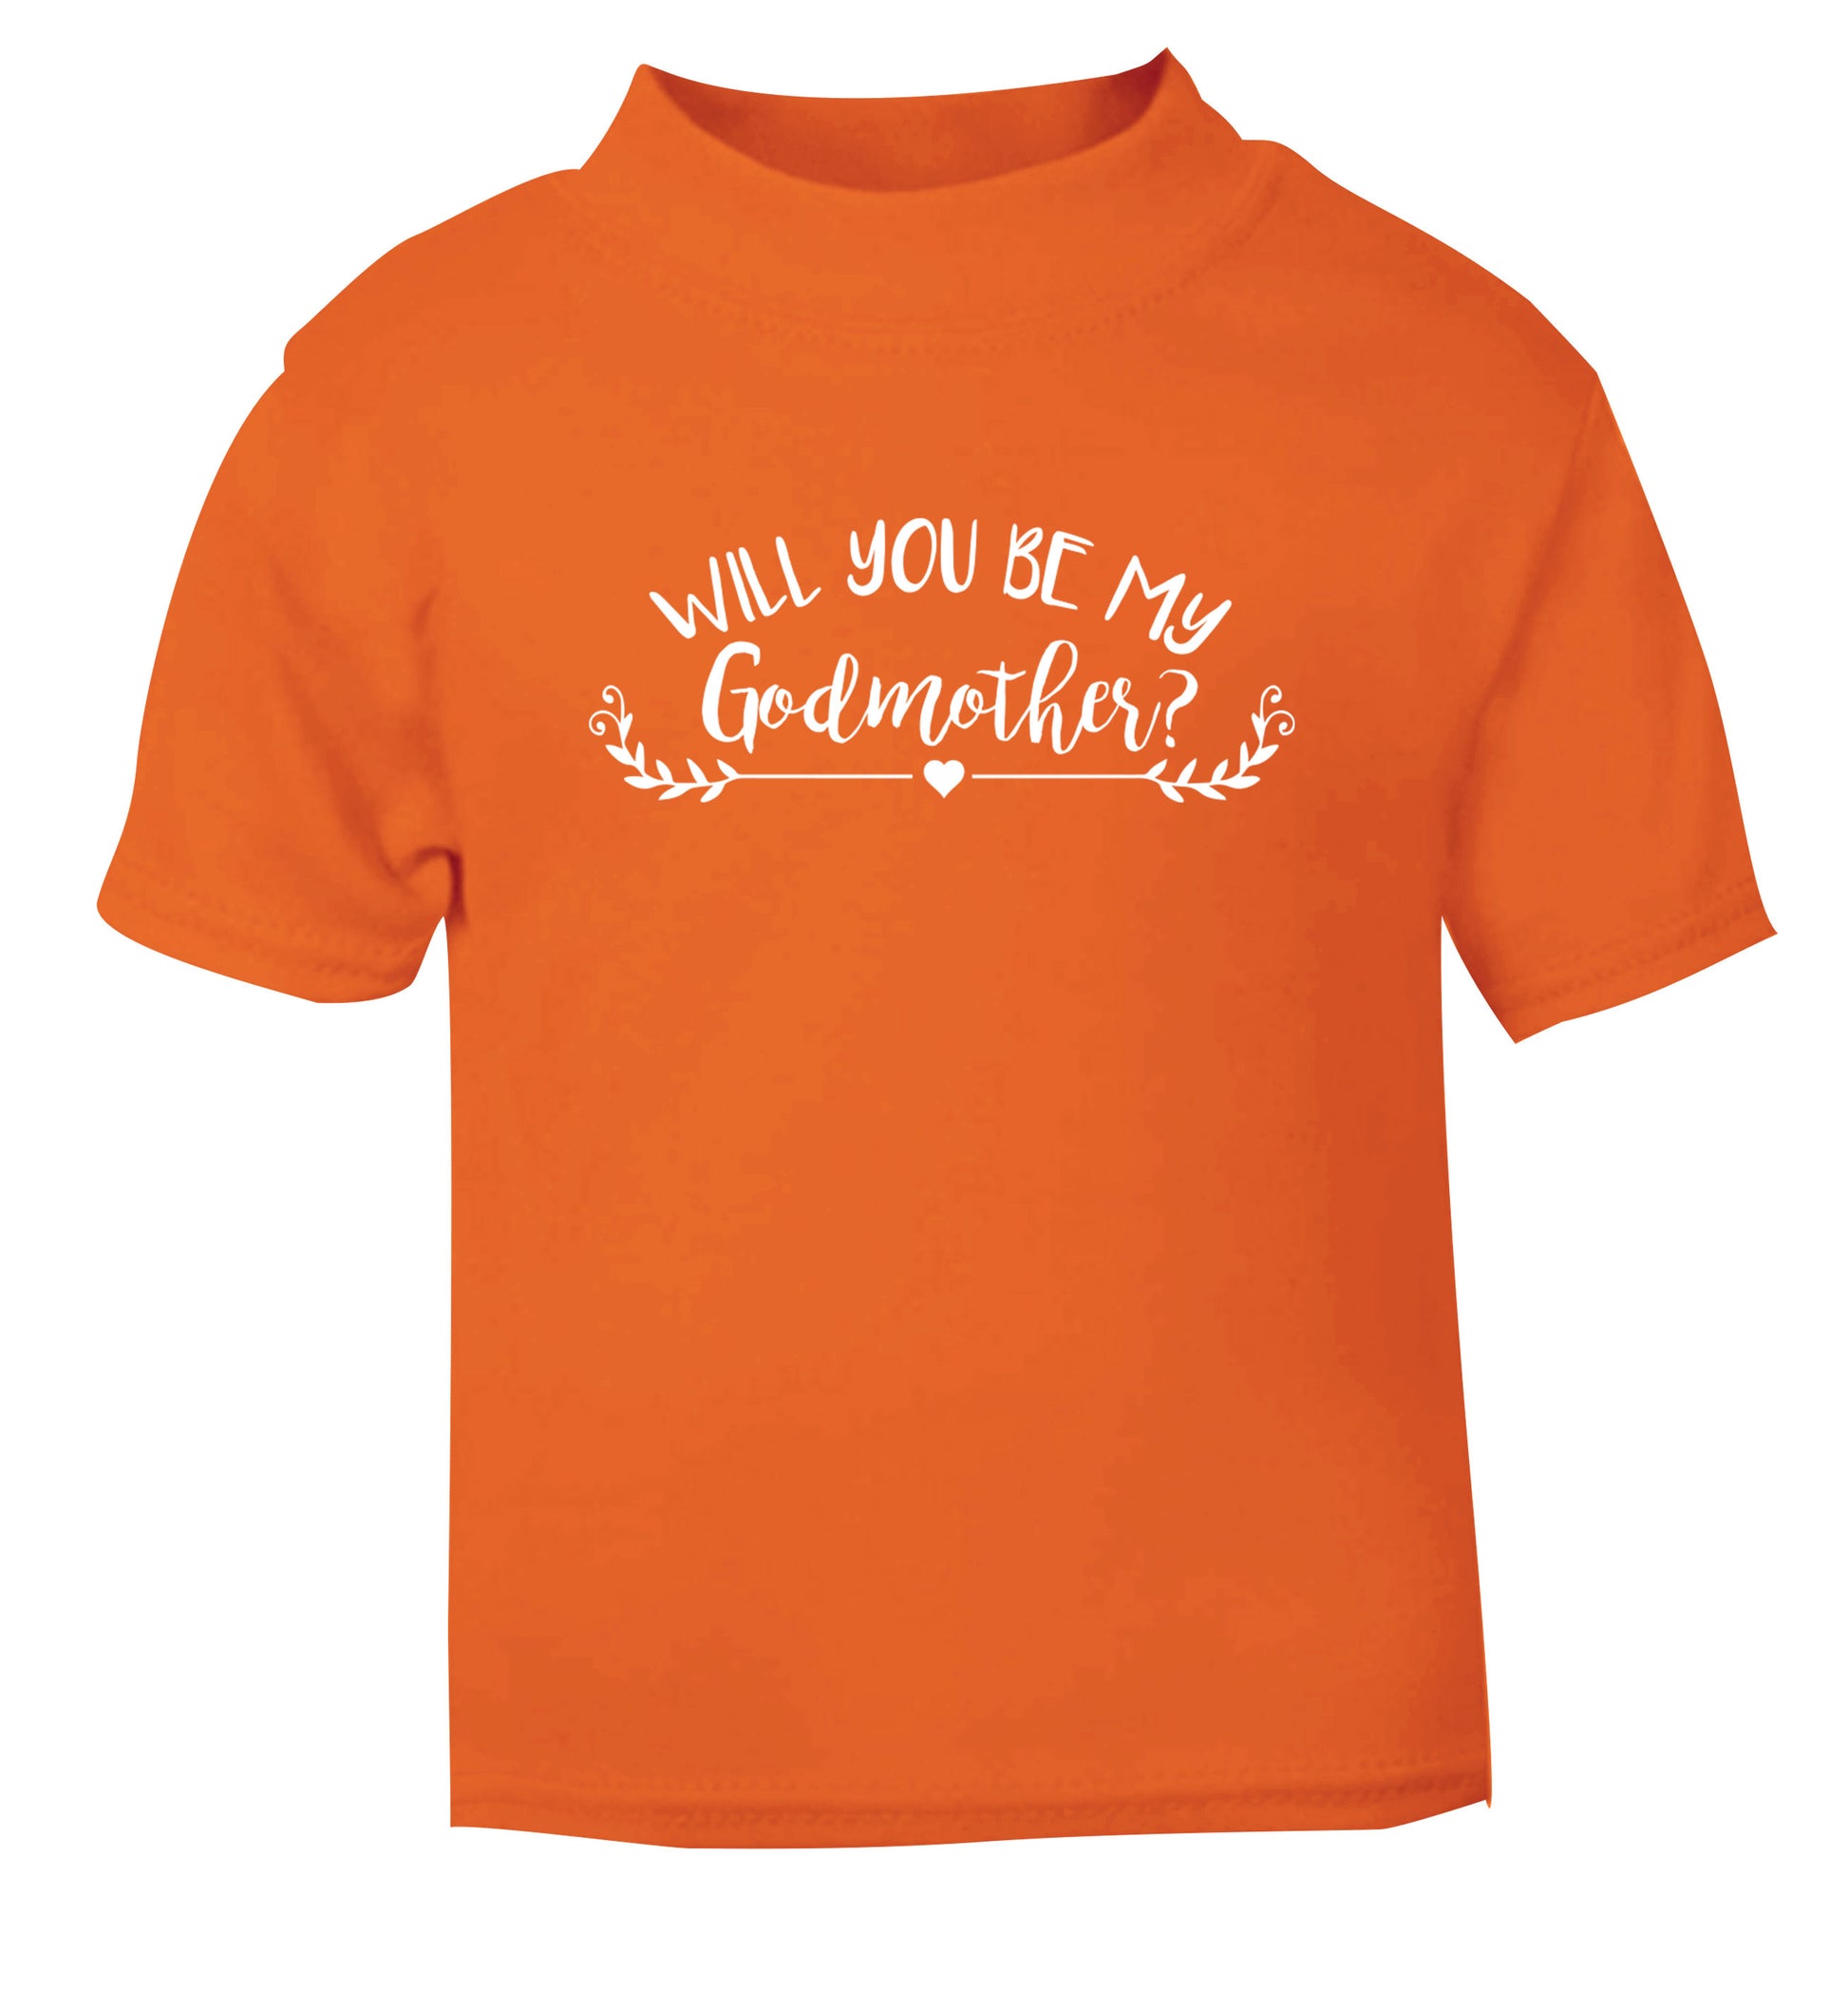 Will you be my godmother? orange Baby Toddler Tshirt 2 Years